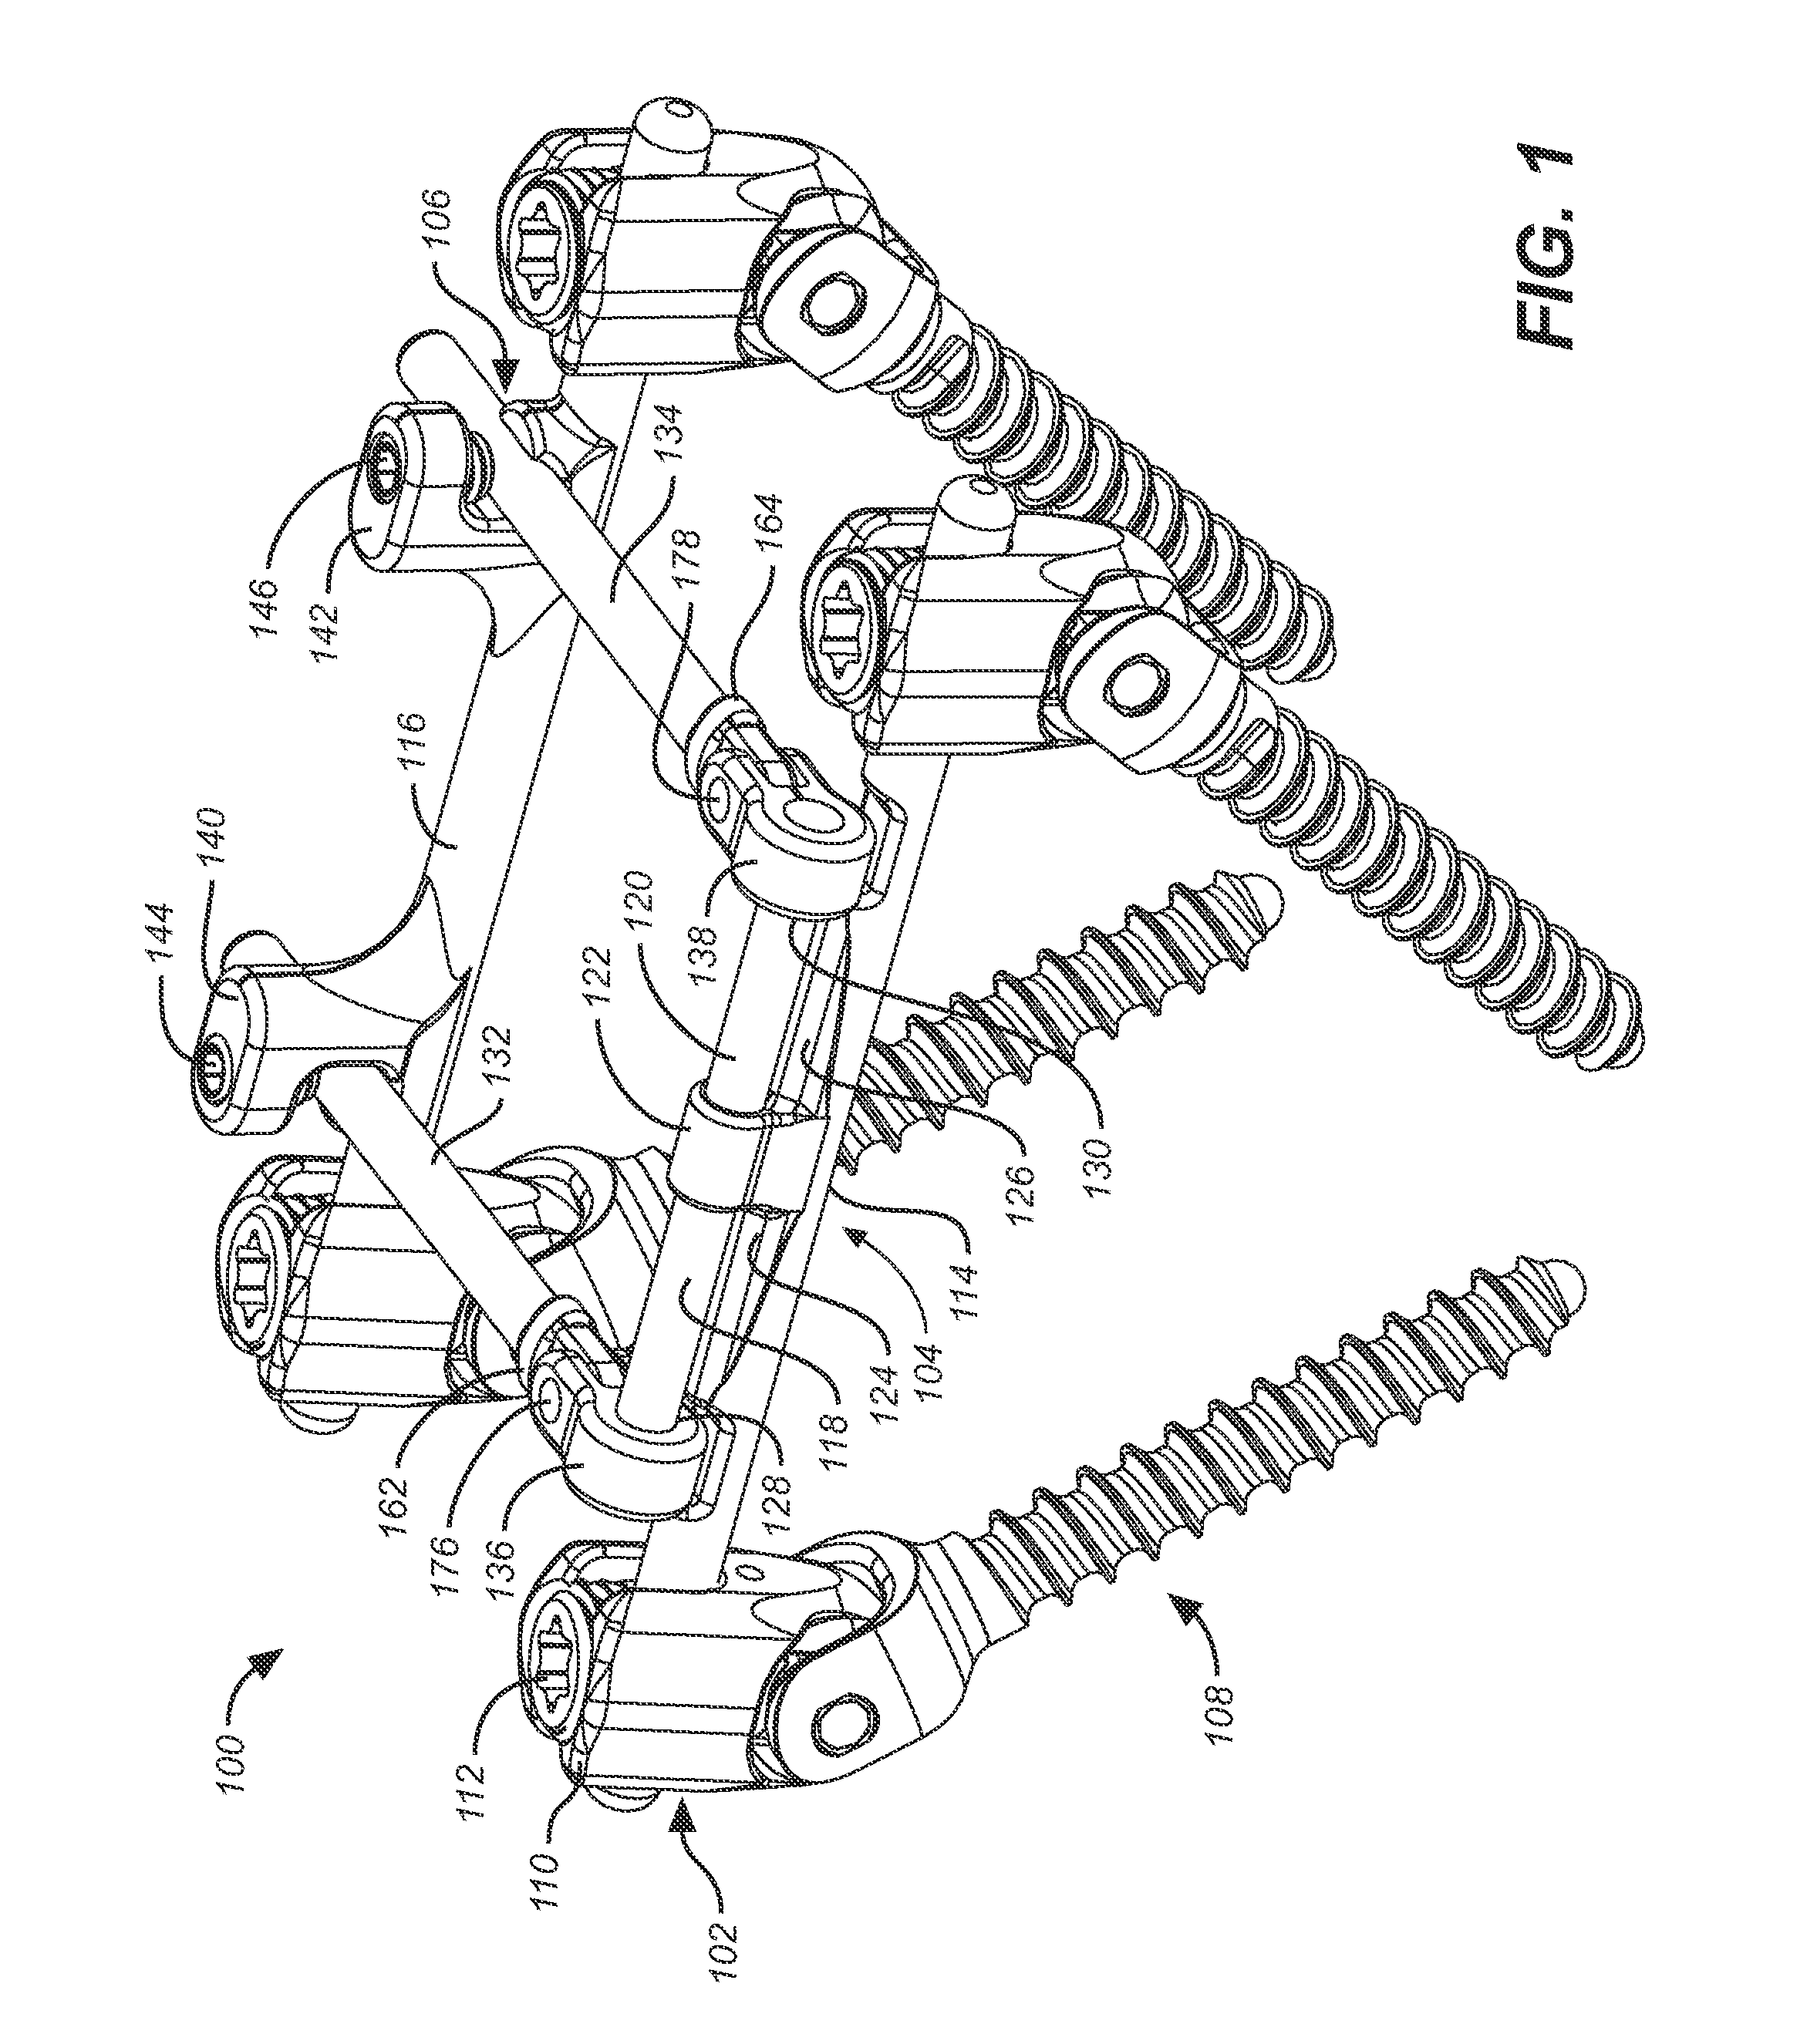 Multi-dimensional horizontal rod for a dynamic stabilization and motion preservation spinal implantation system and method